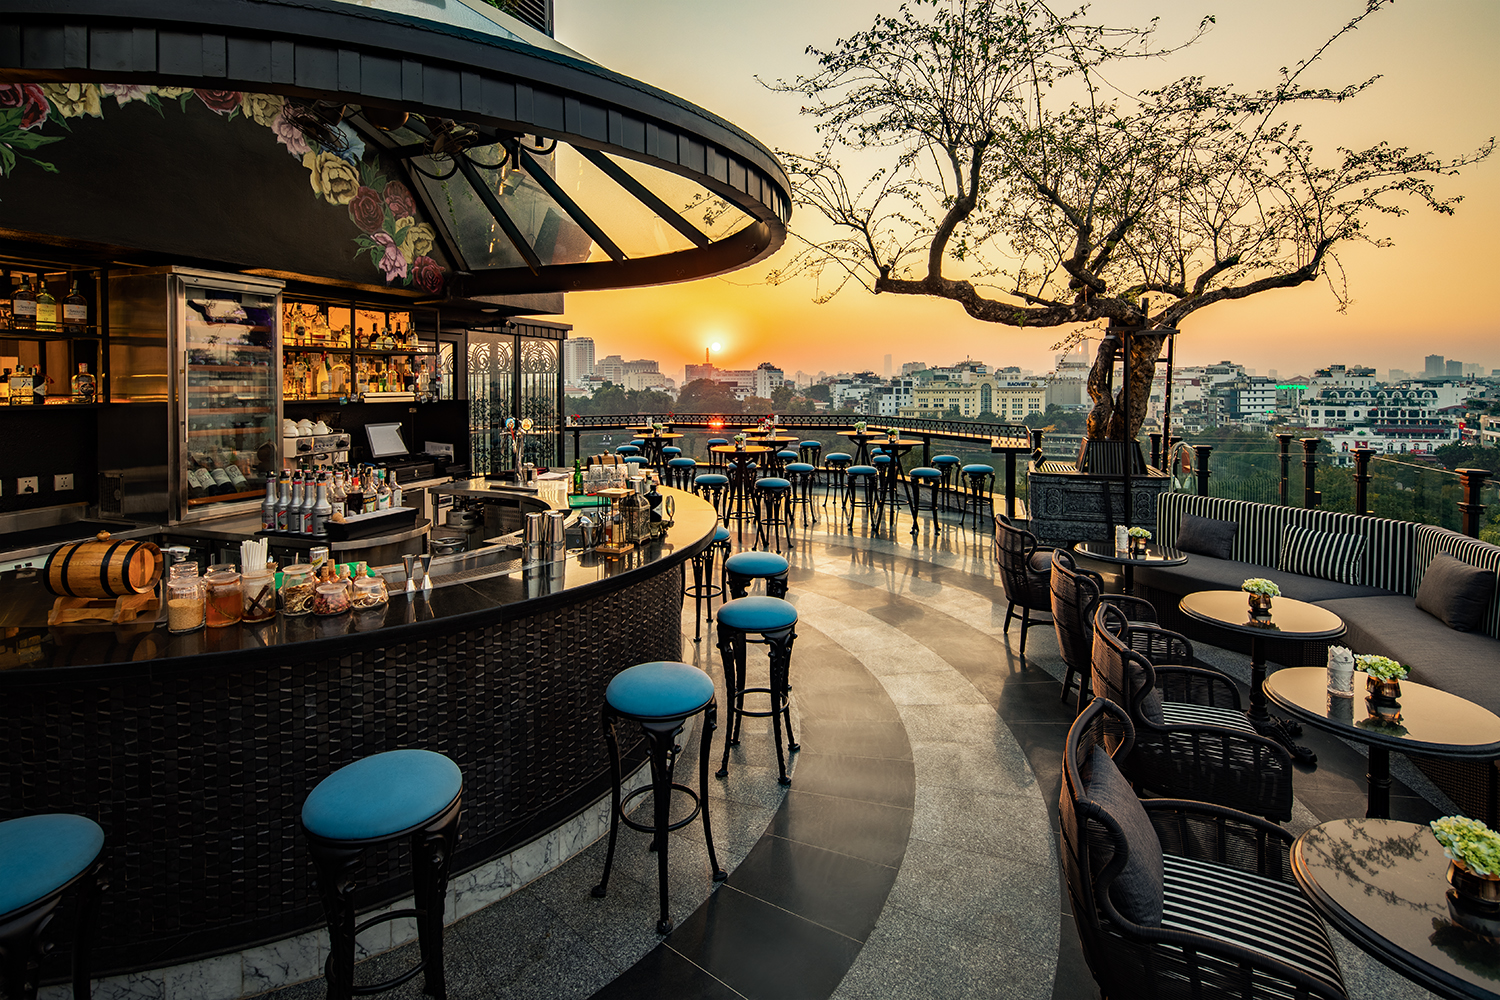 As one of the top restaurants in Hanoi, Terraço is known for its diverse options